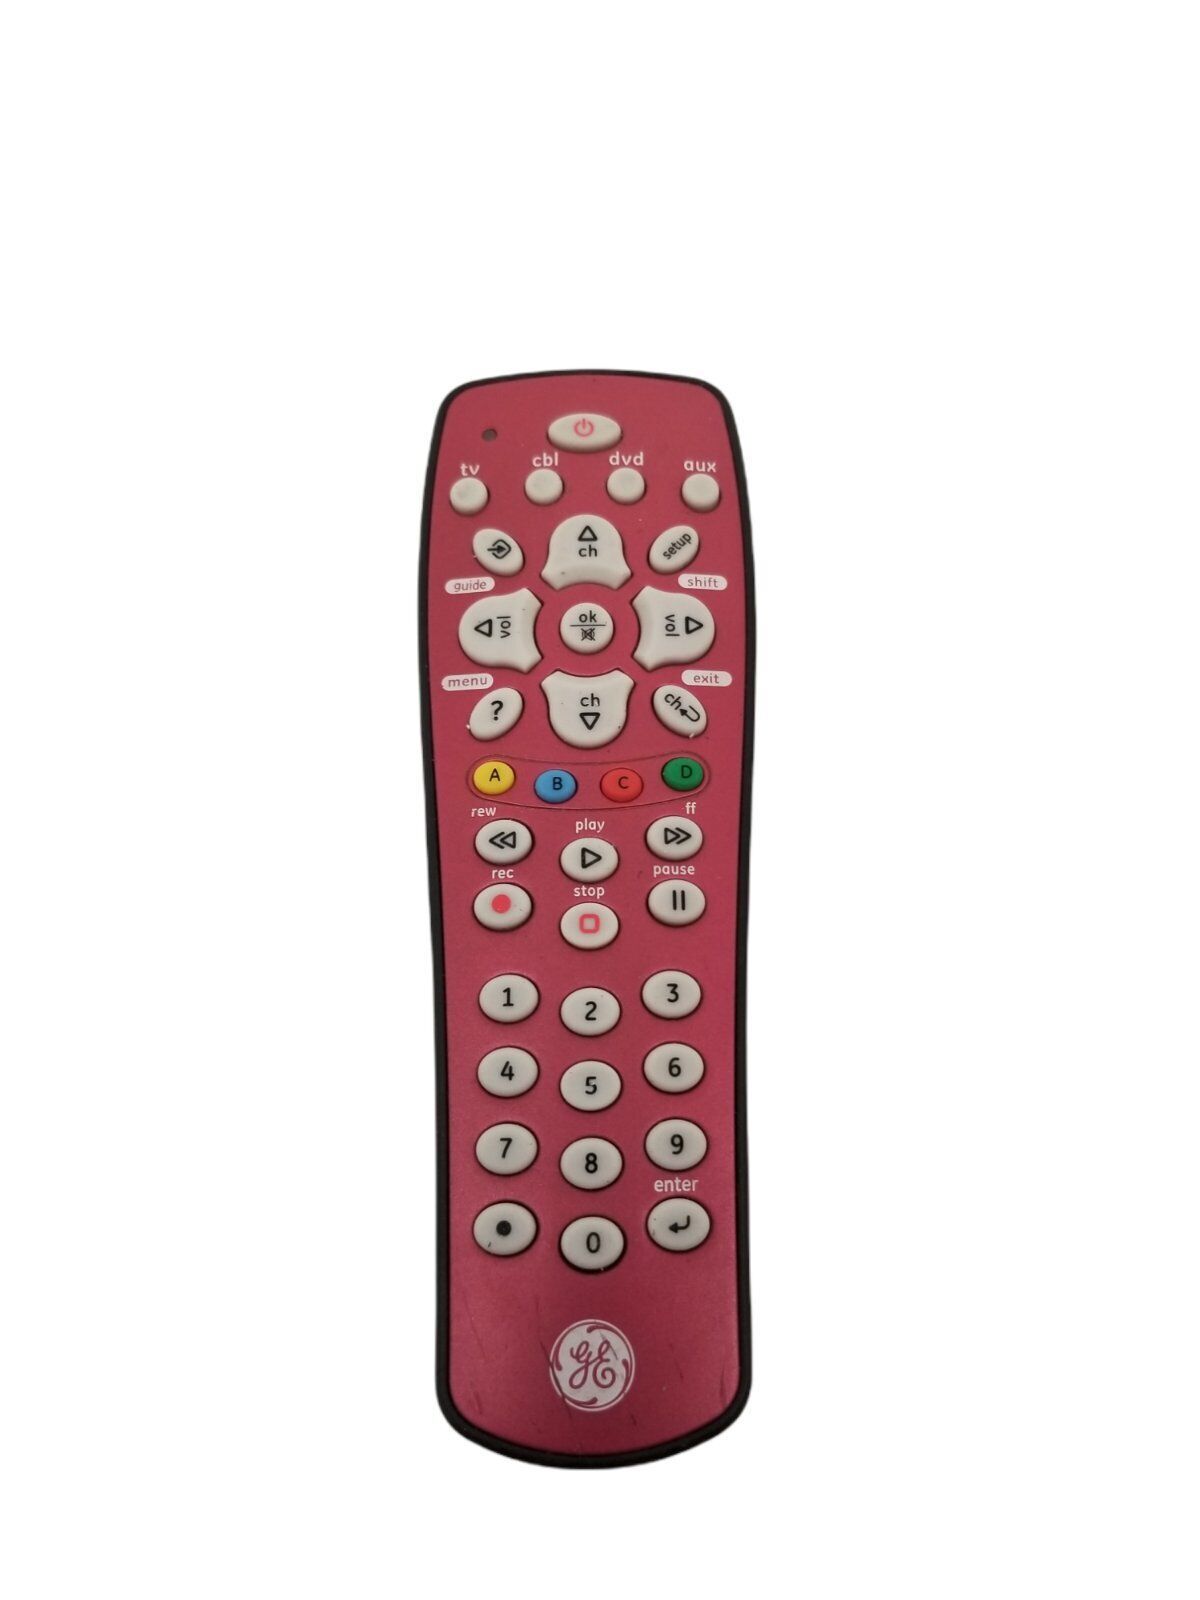 Primary image for GE Television PINK 12404 CL3 1445 TV Remote Control 